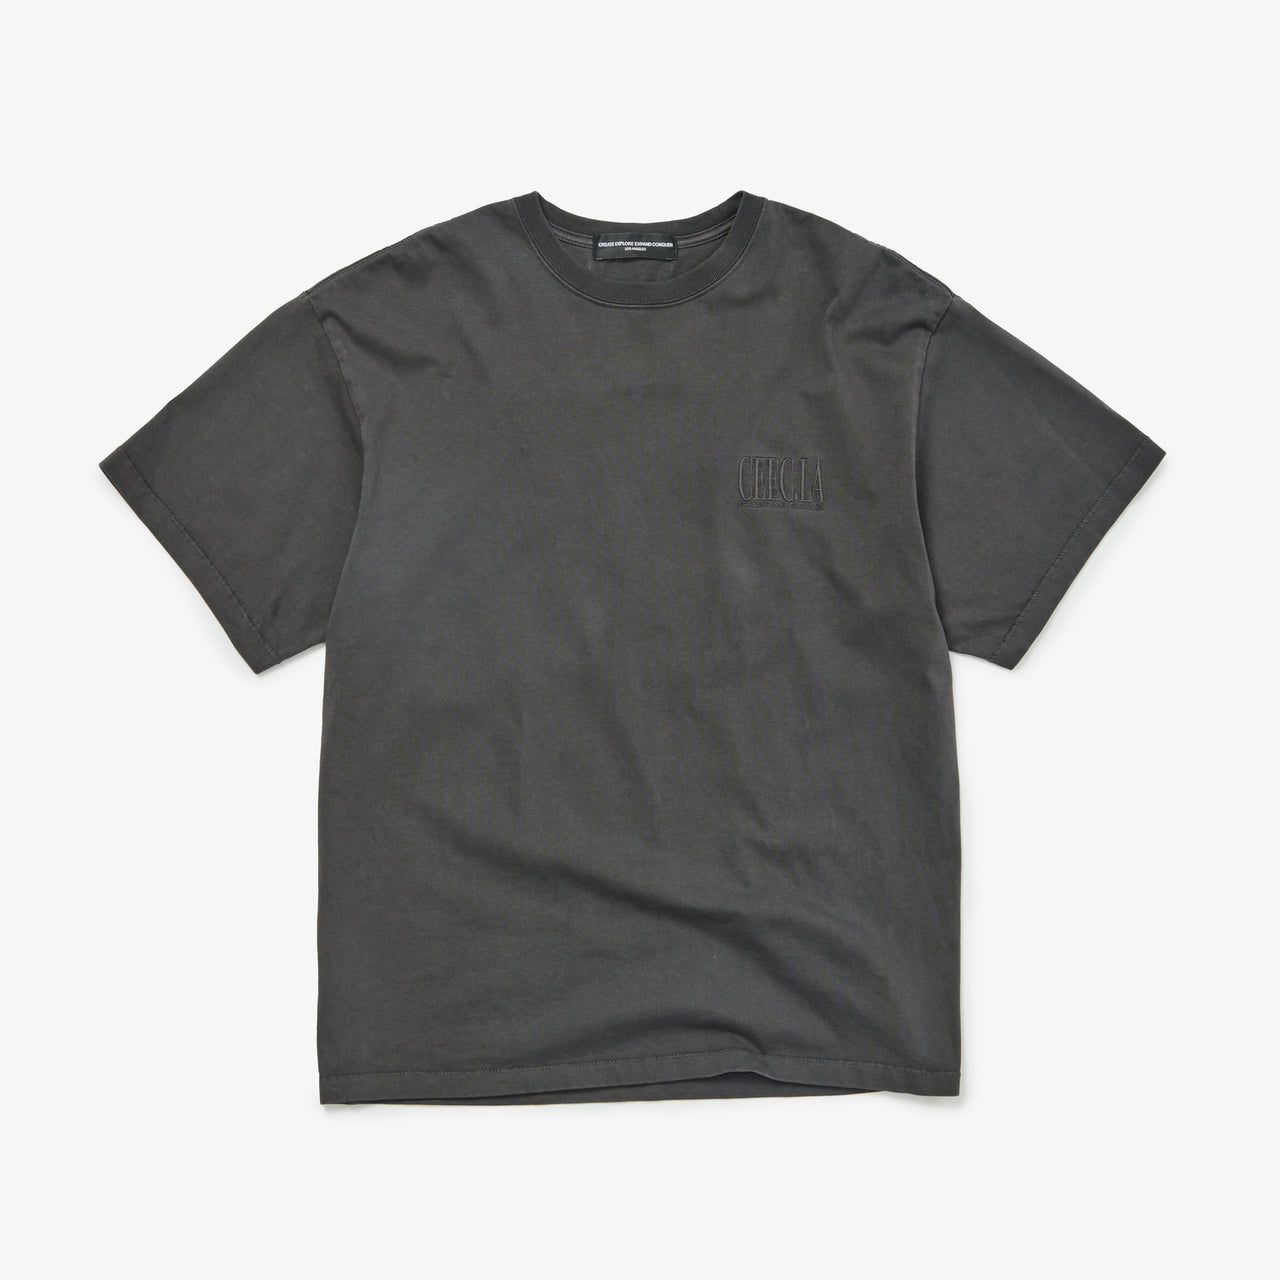 C.E.E.C. Embroidered T-Shirt in Vintage Black